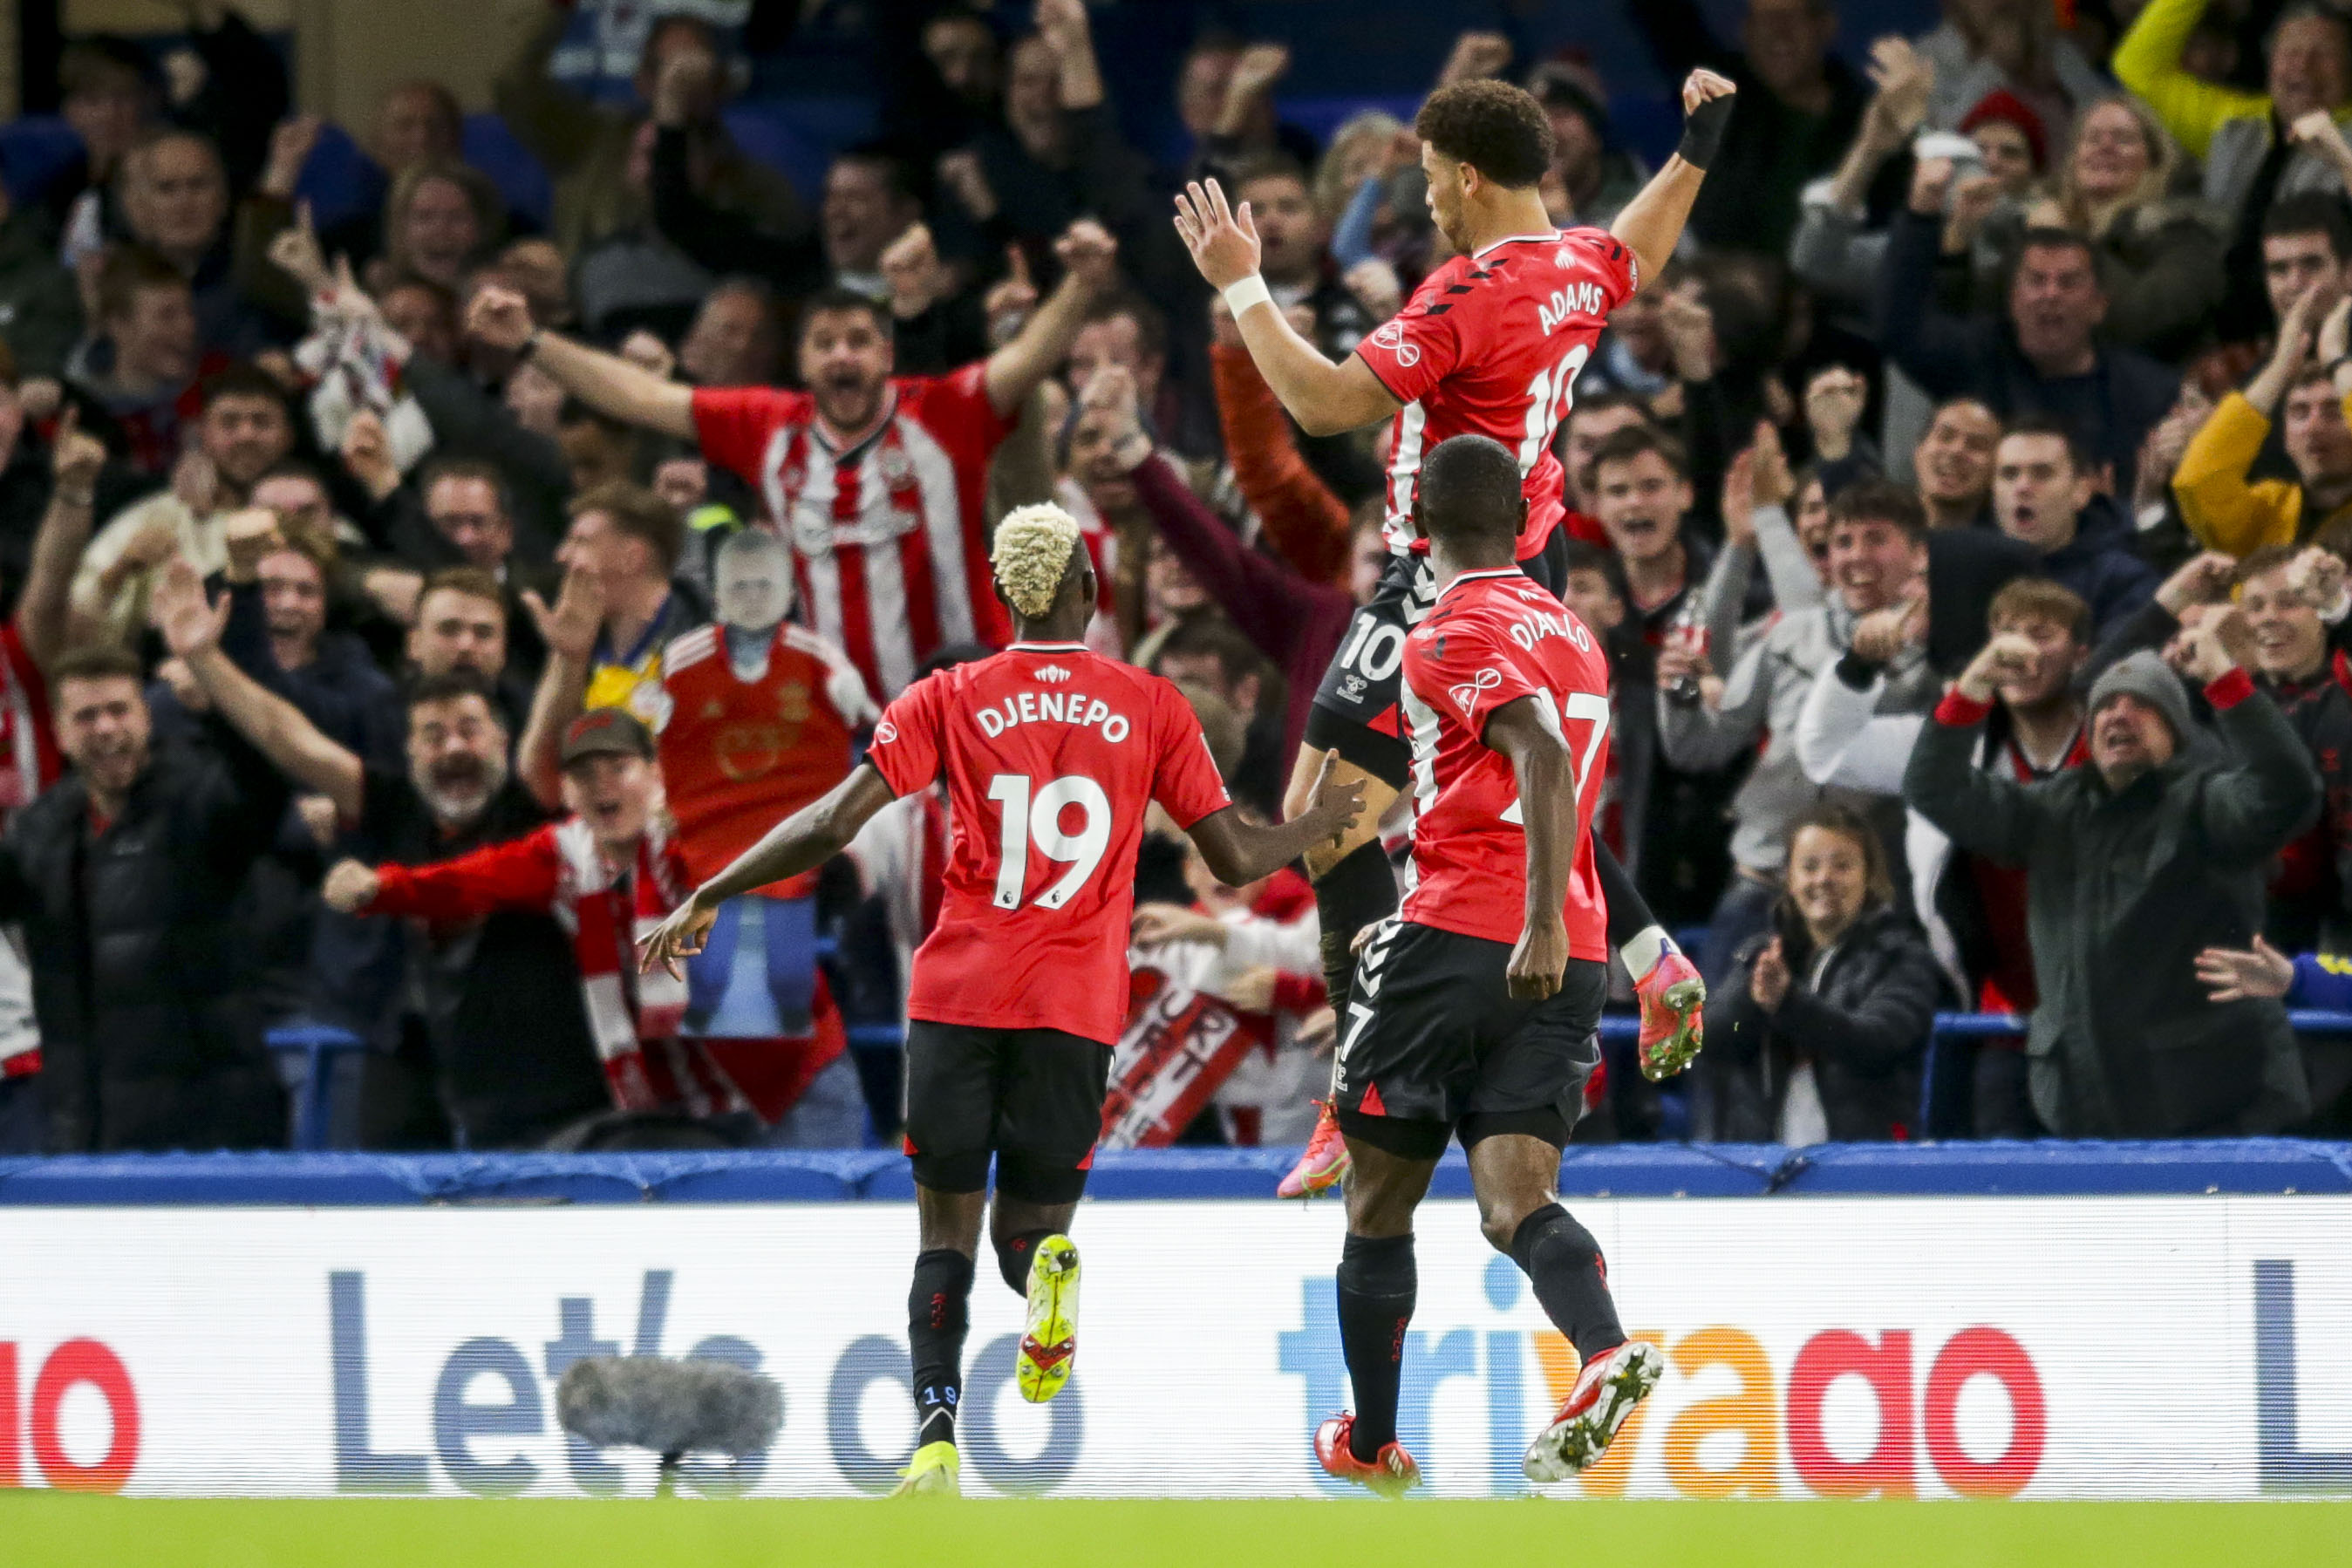 Chelsea v Southampton - Carabao Cup Round of 16, Che Adams, match report, Kai Havertz, League Cup, EFL